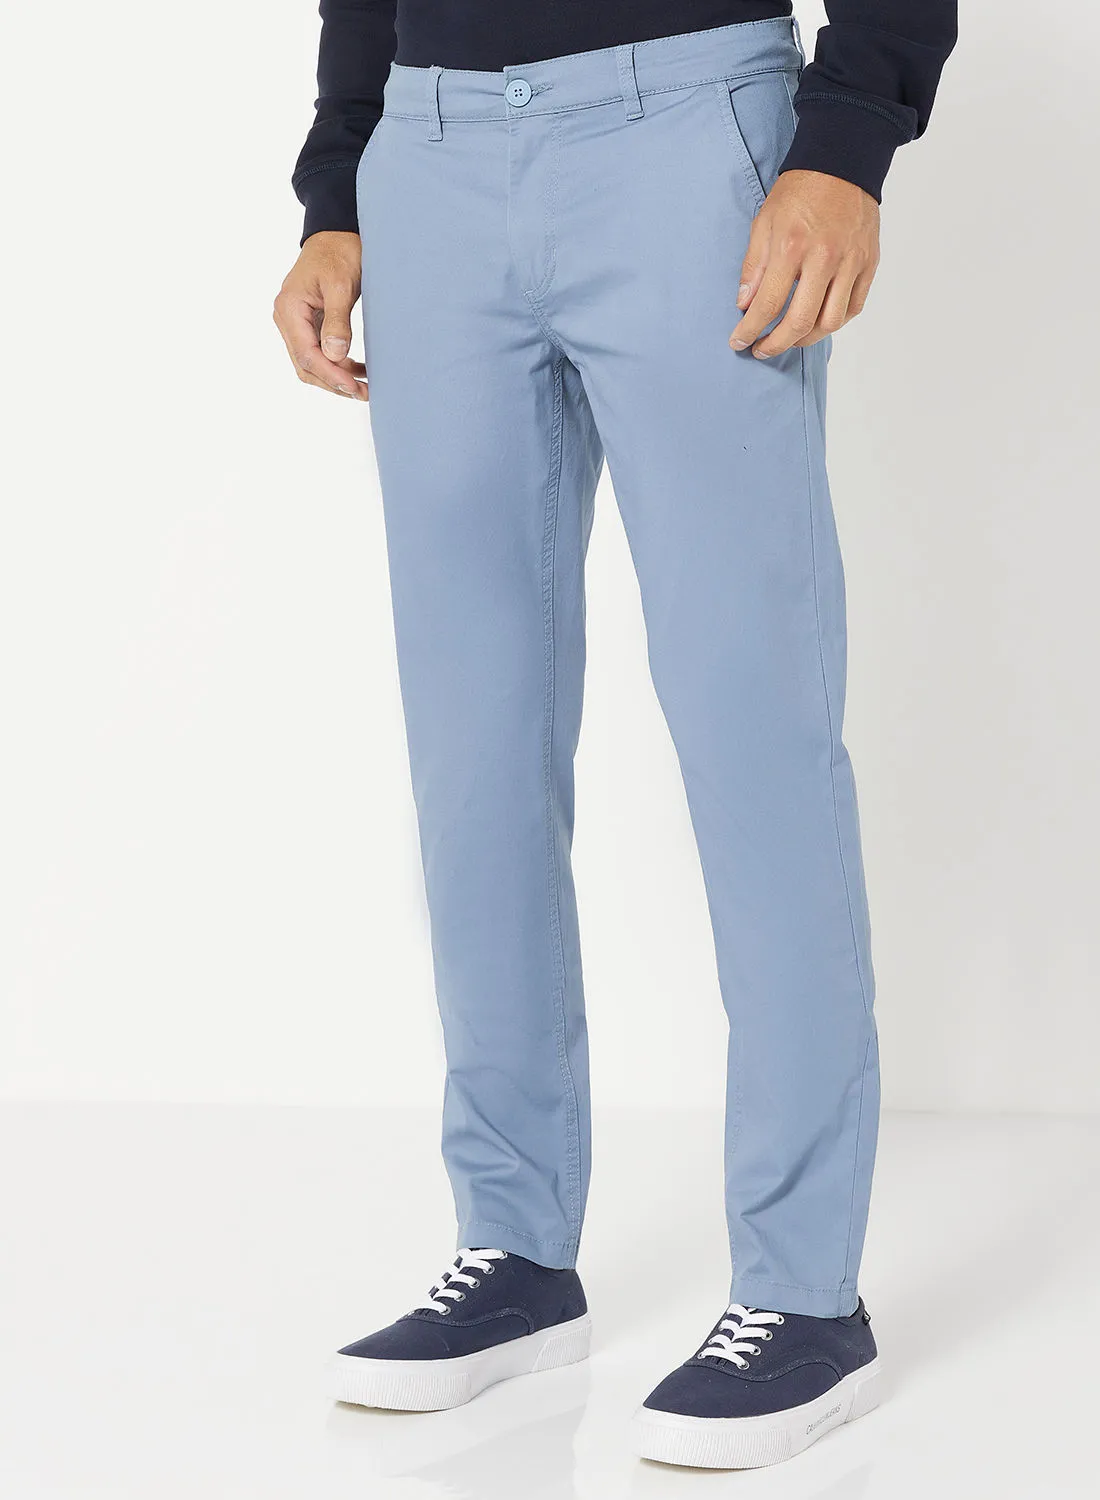 Noon East Solid Pattern Skinny Fit Pants Midnight Blue